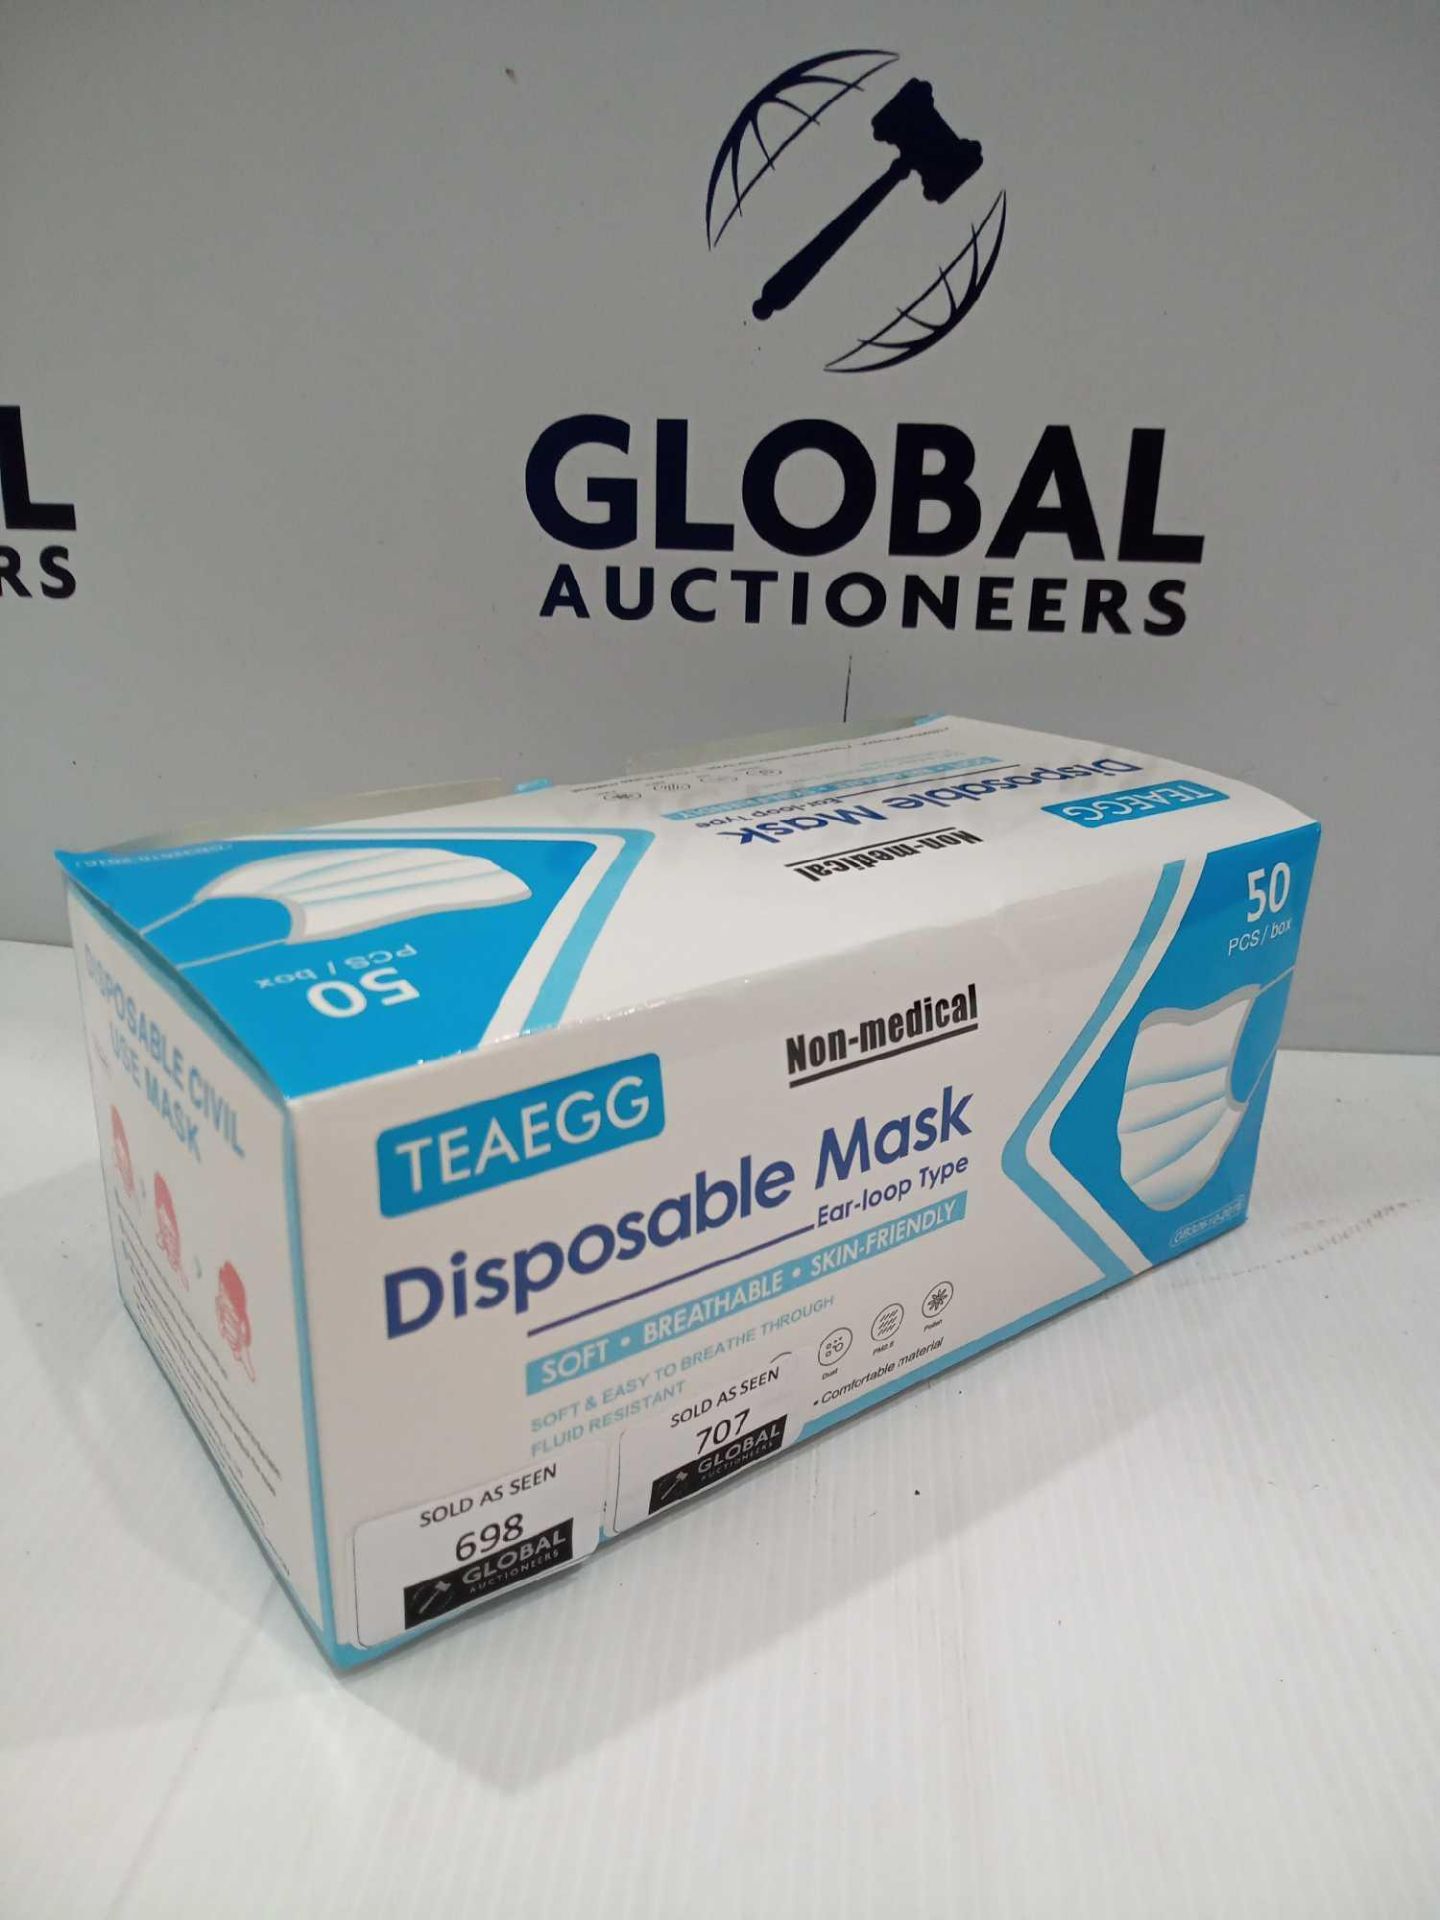 Rrp £300 Box To Contain 50 Brand New Teaegg Non-Medical Disposable 3Ply Earloop Type Soft And Breath